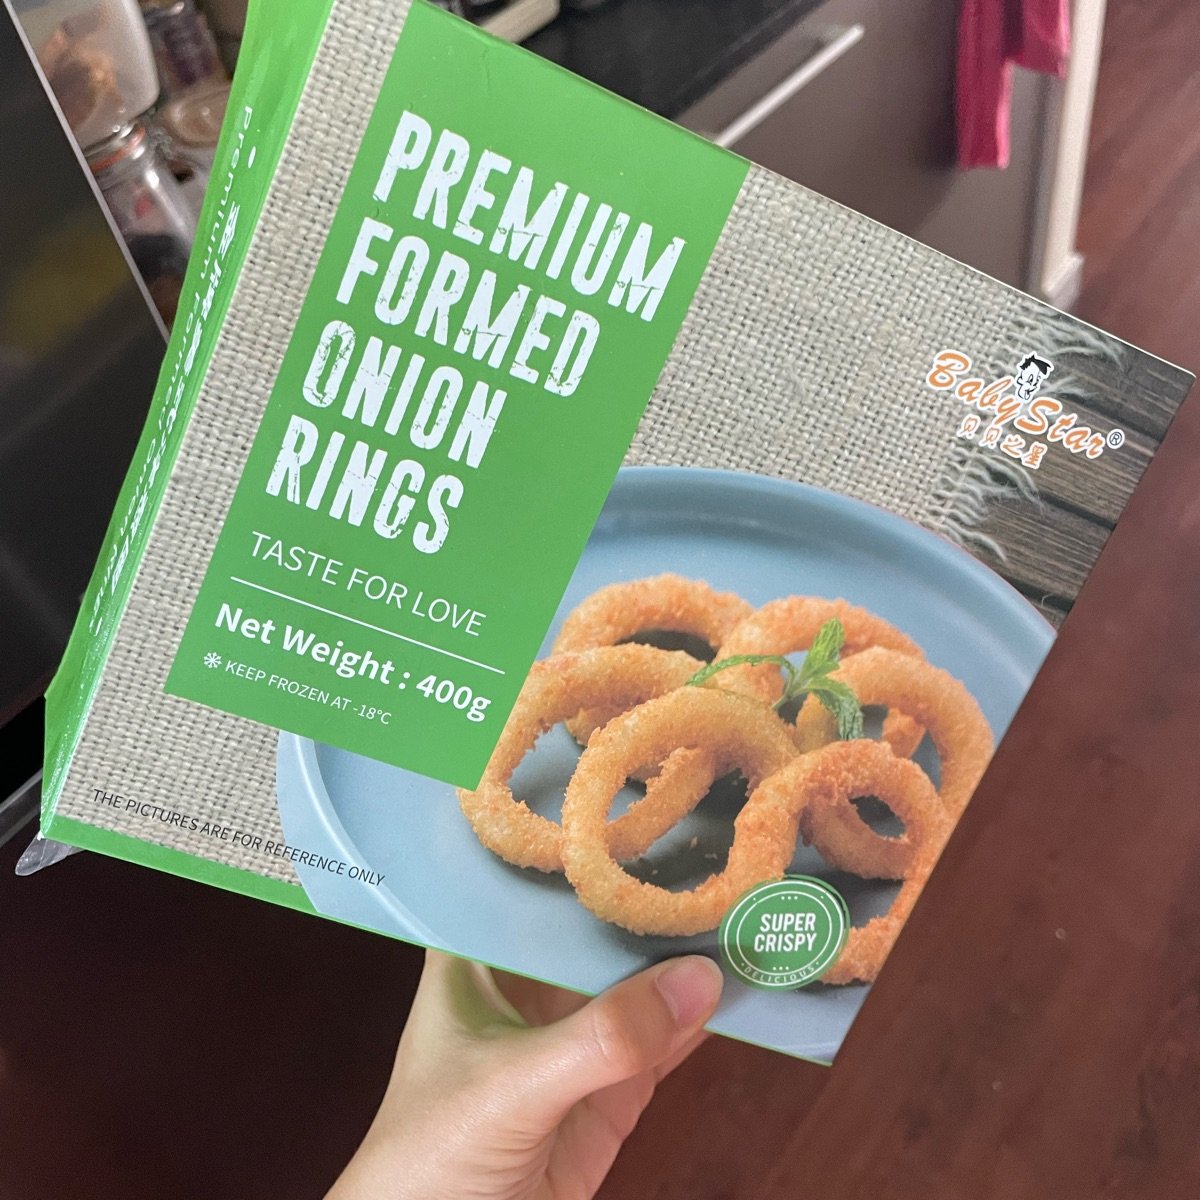 Morrisons Made To Share Onion Rings (280g) - Compare Prices & Where To Buy  - Trolley.co.uk